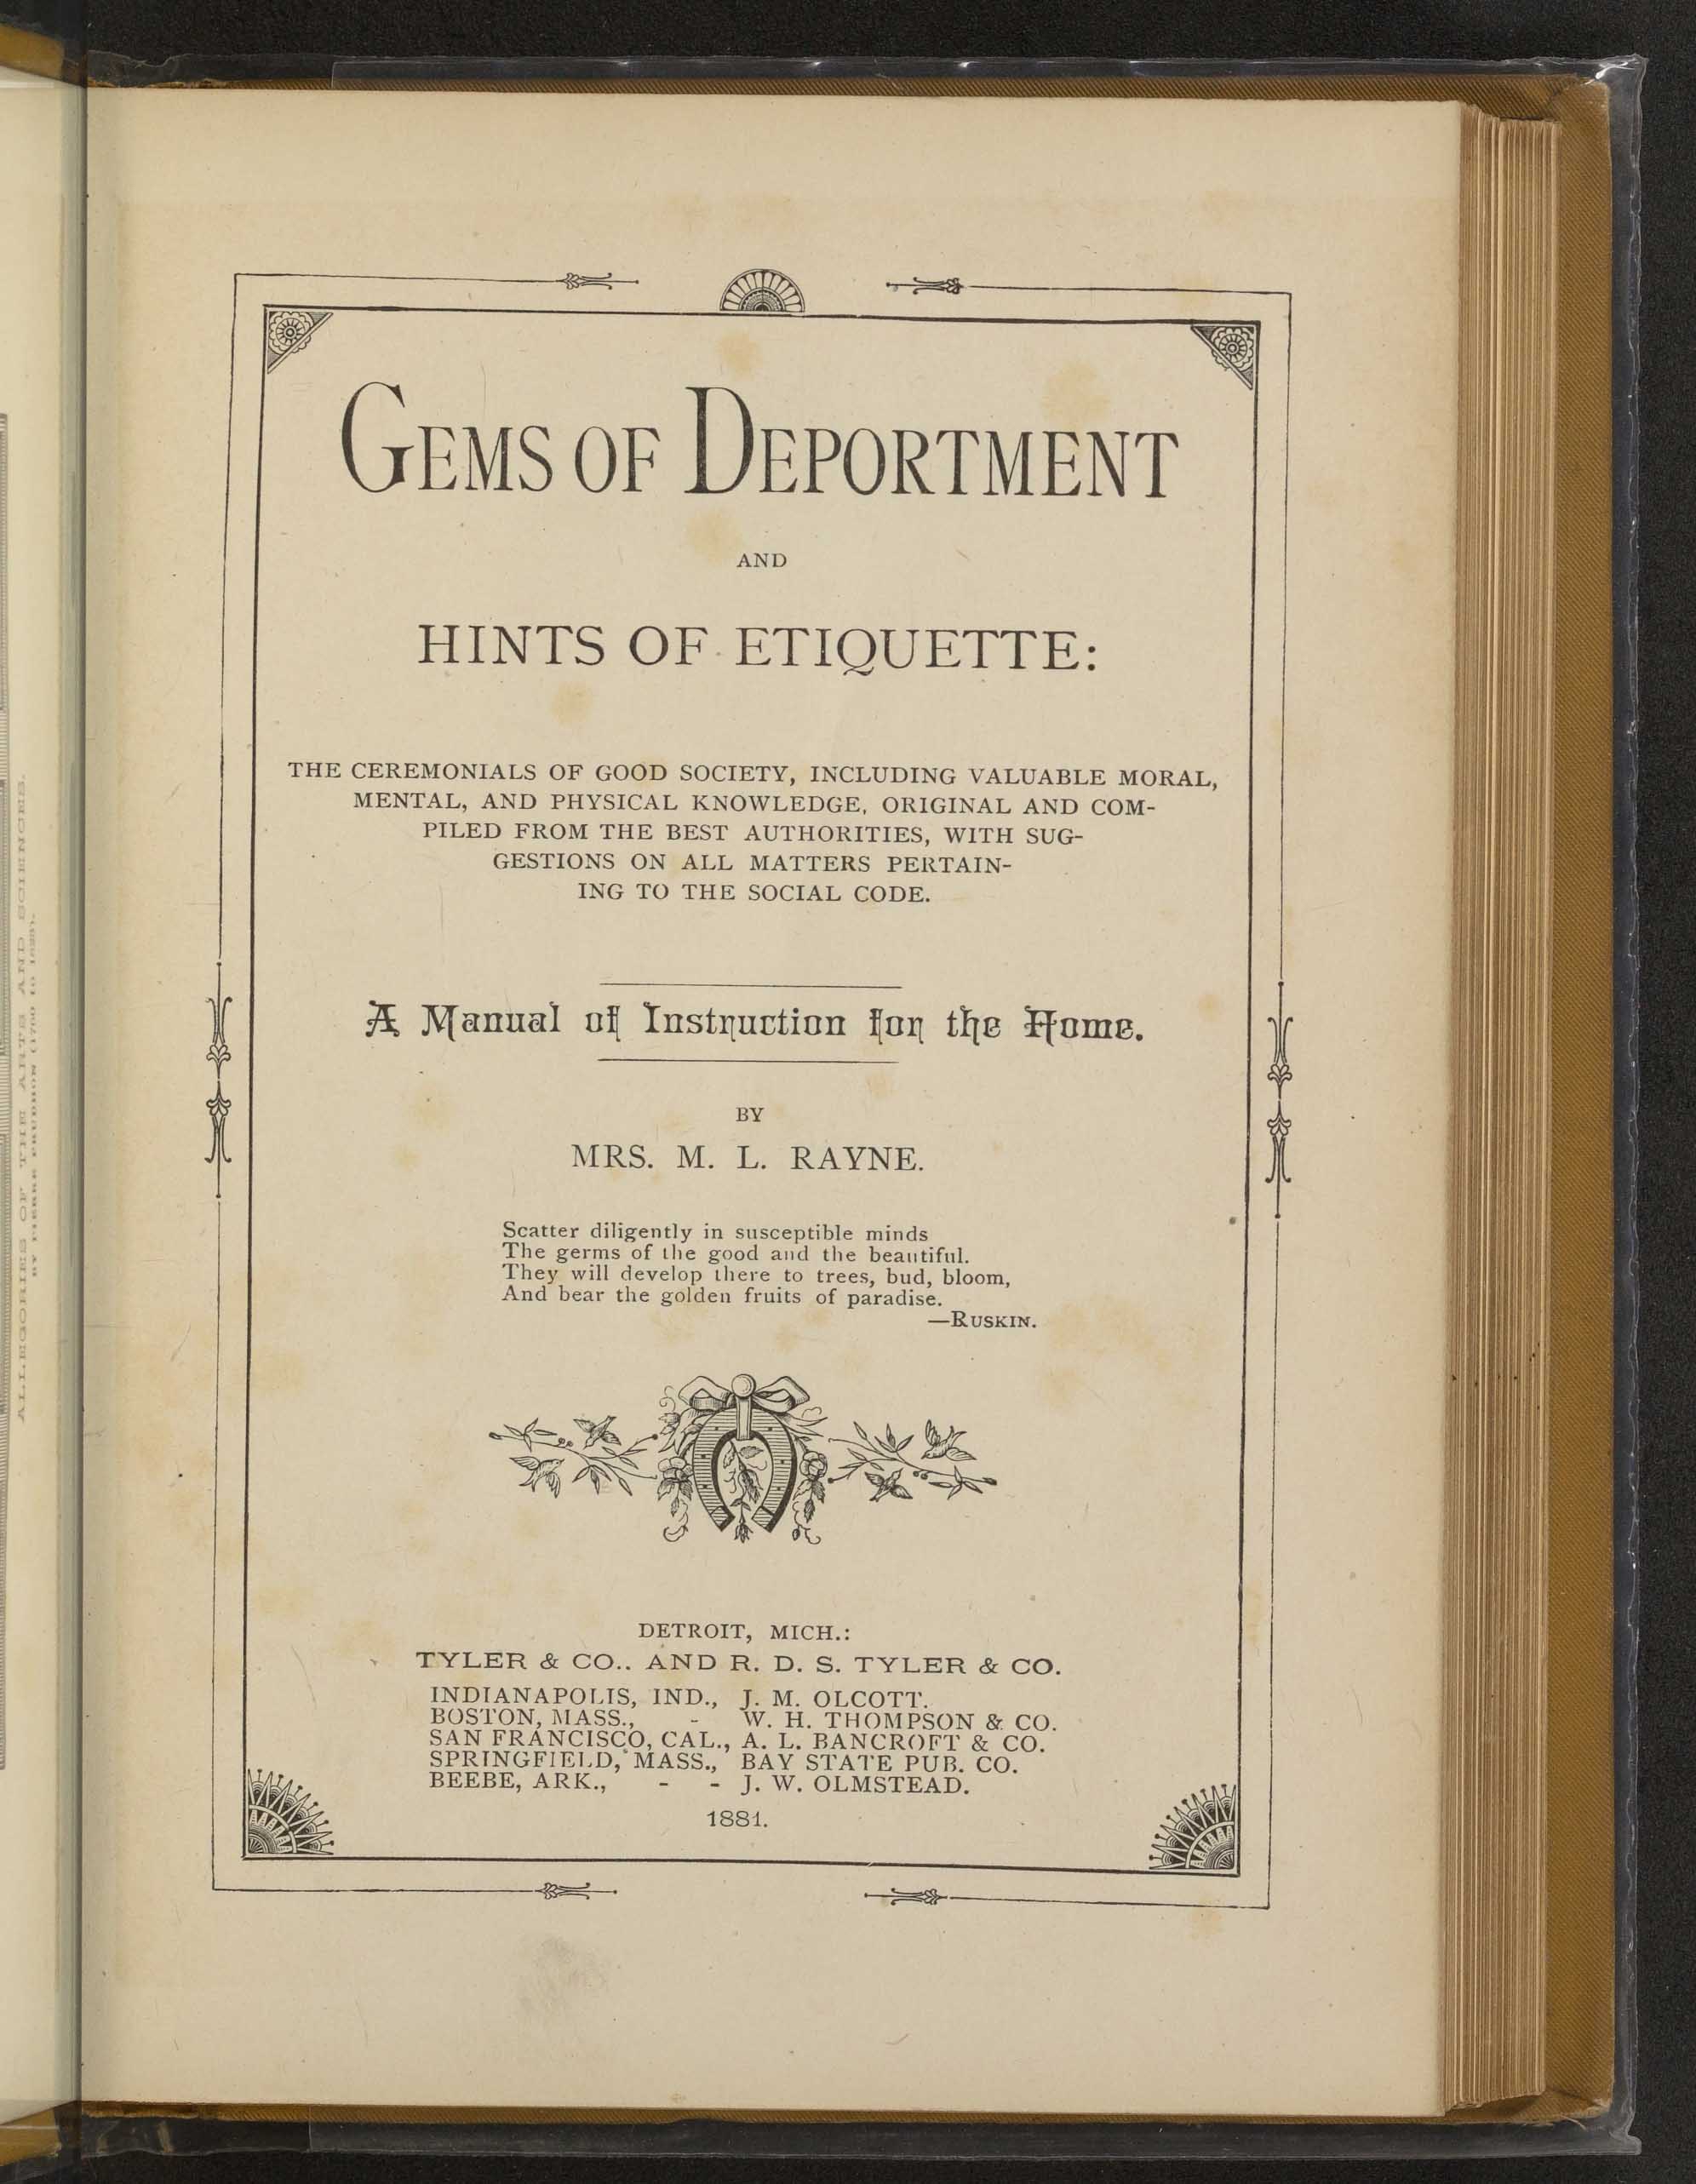 Gems of Deportment and Hints of Etiquette